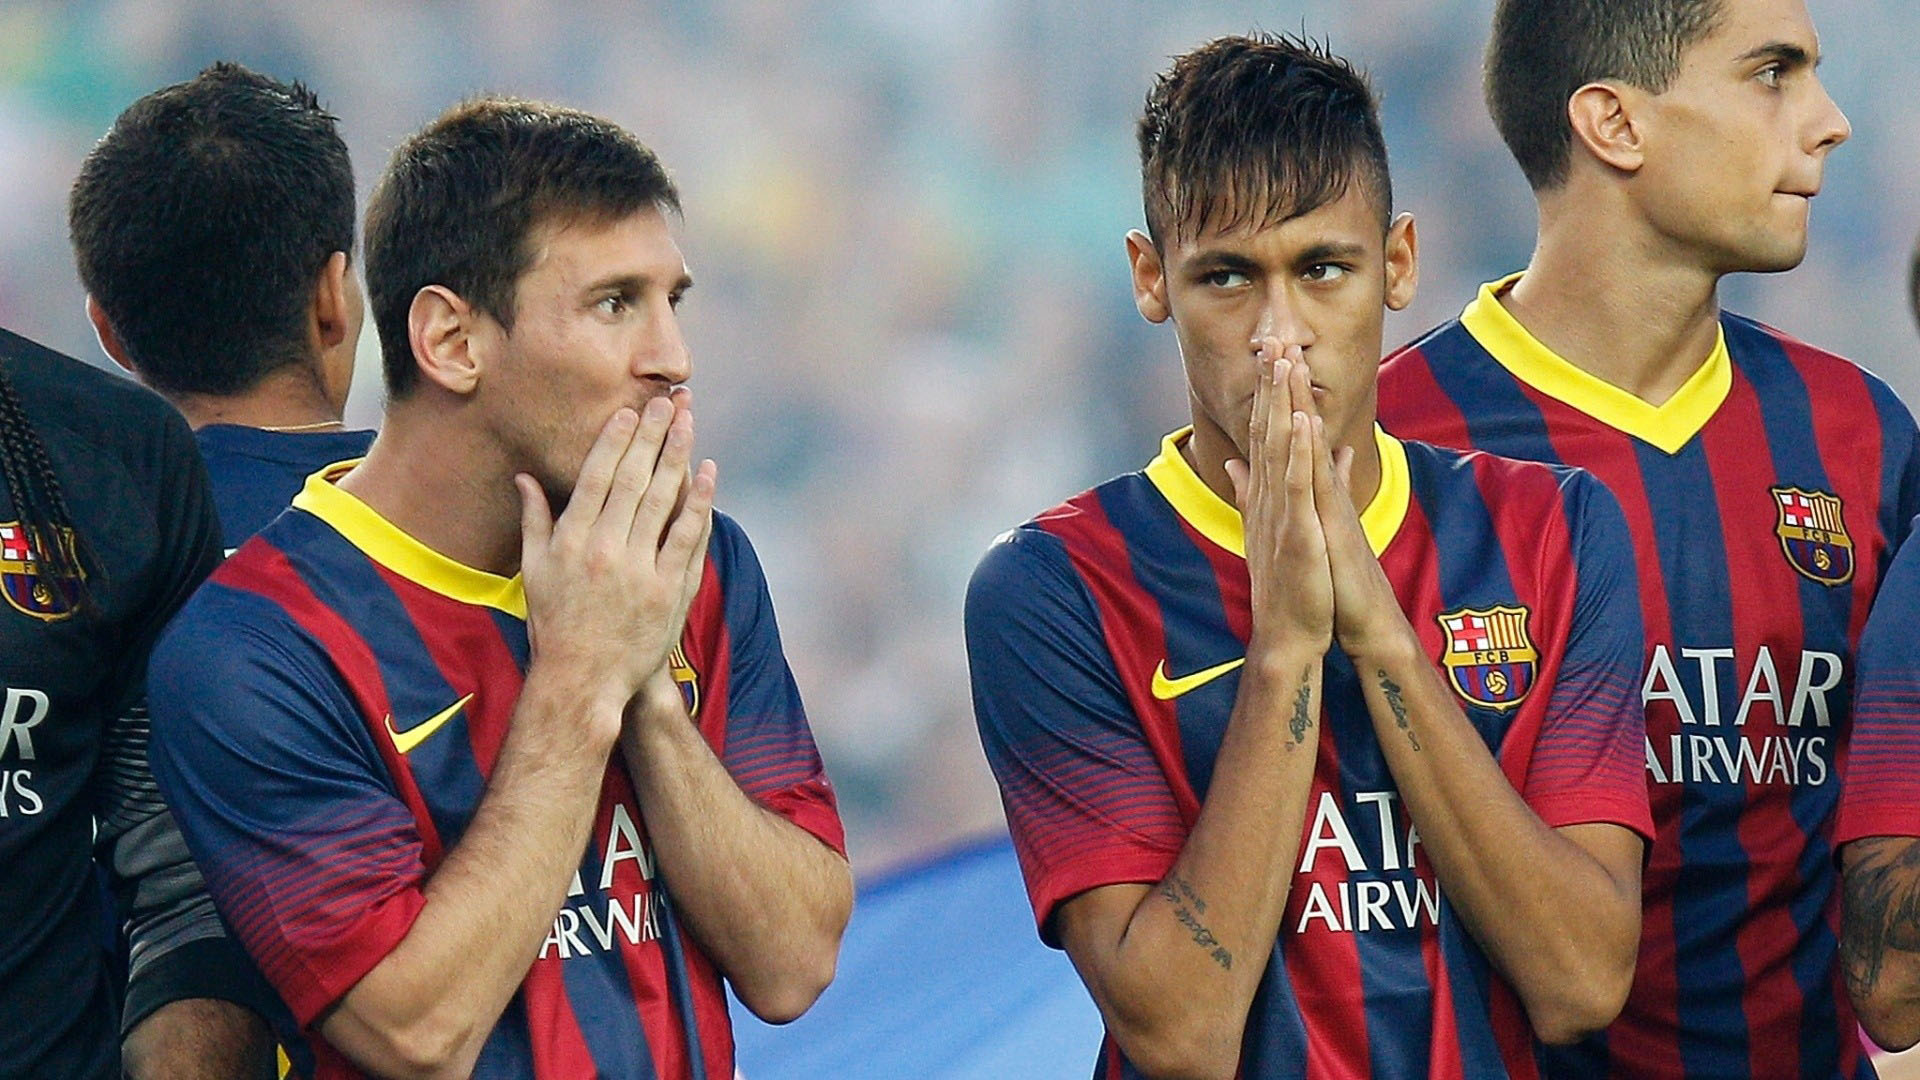 Messi and Neymar nervous during a Barcelona media photoshoot